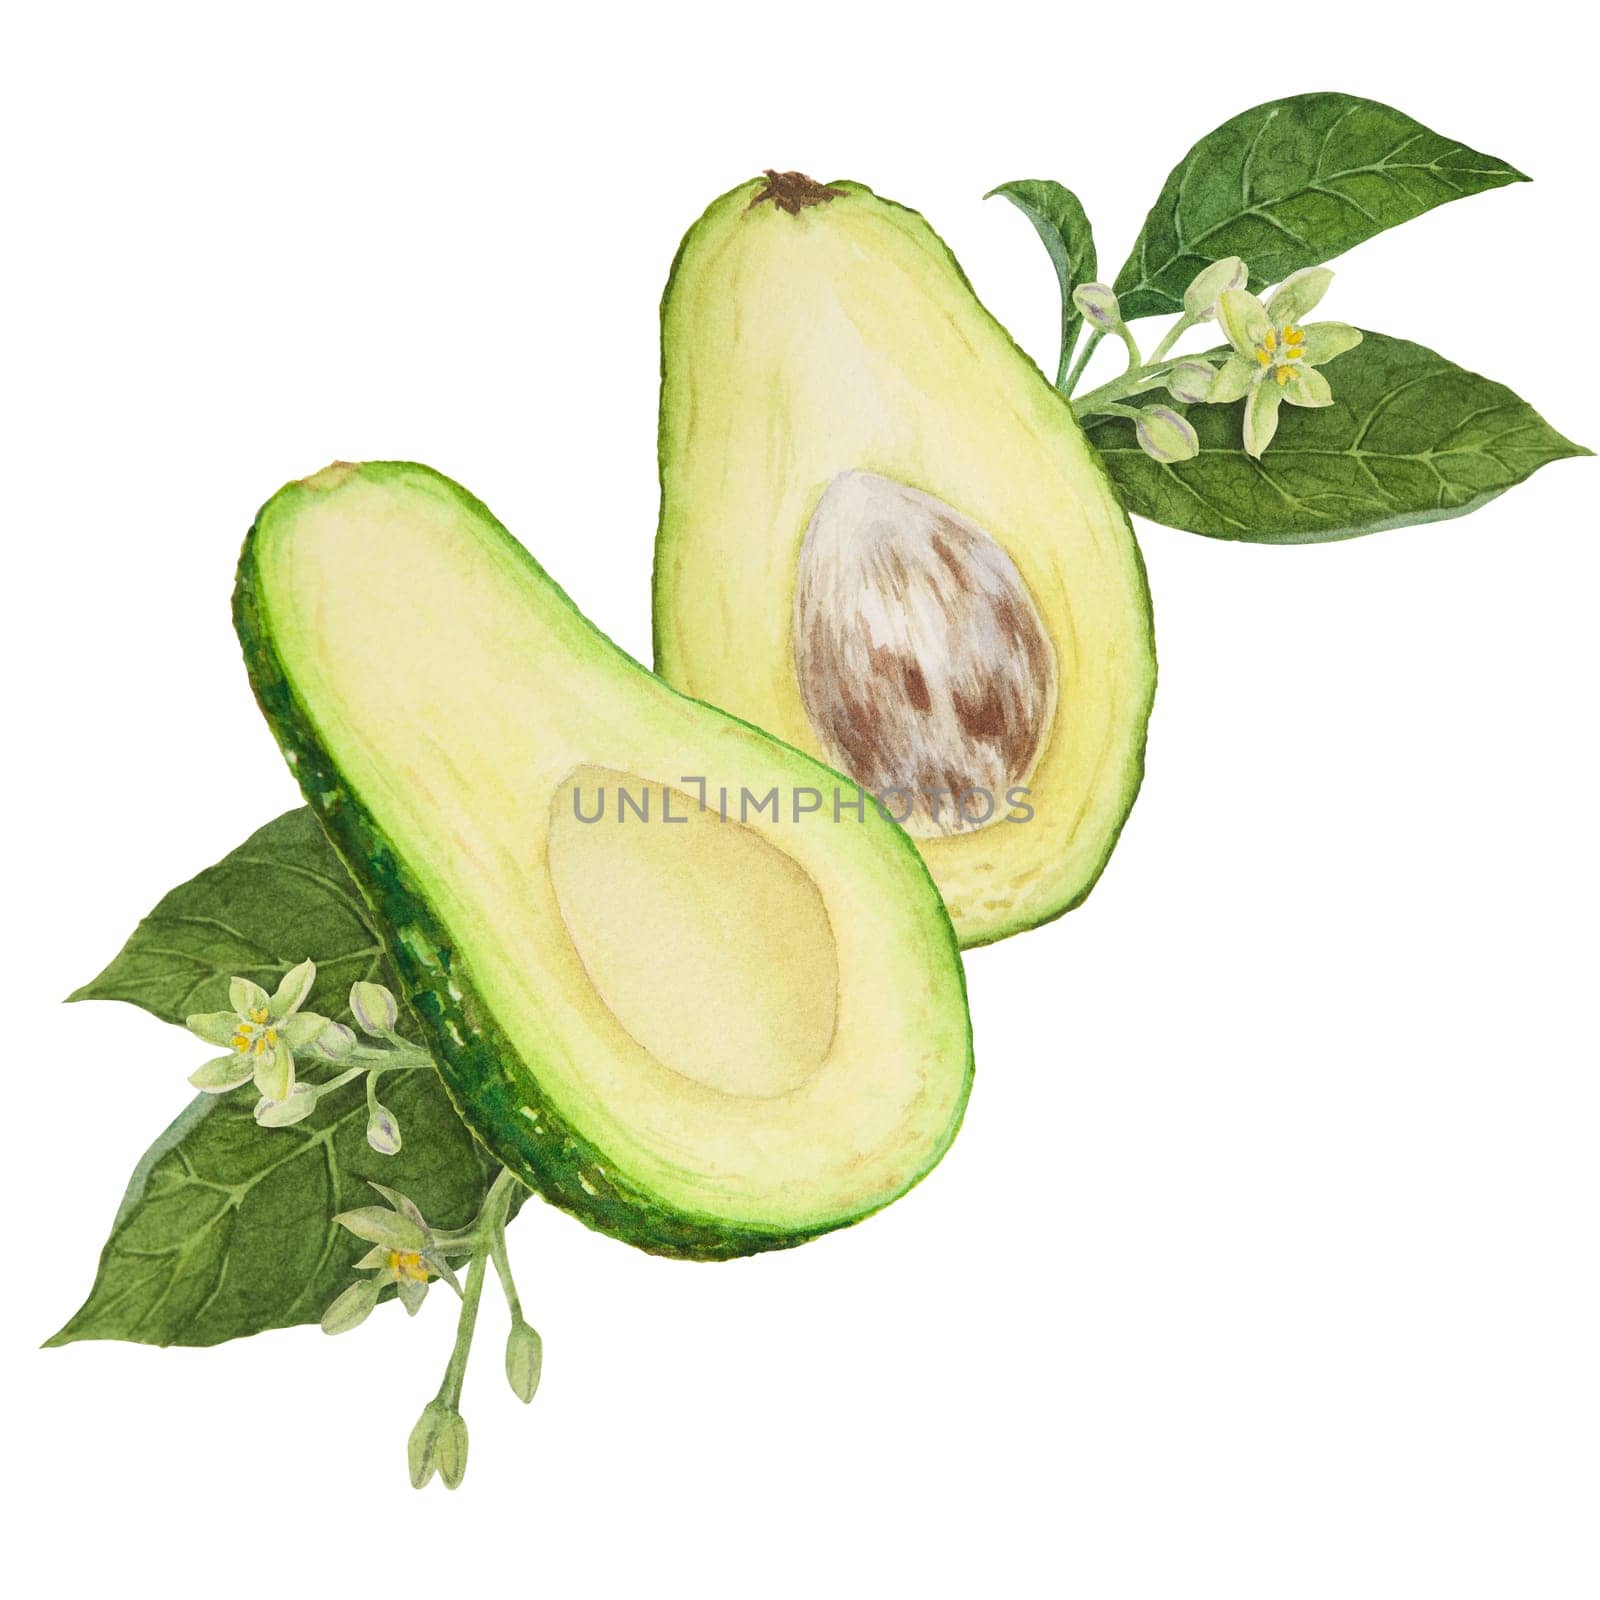 Avocado halves with leaves and flowers watercolor hand drawn realistic illustration. Green and fresh art of salad, sauce, guacamole, smoothie ingredient. For textile, menu, cards, paper, package, cooking books design